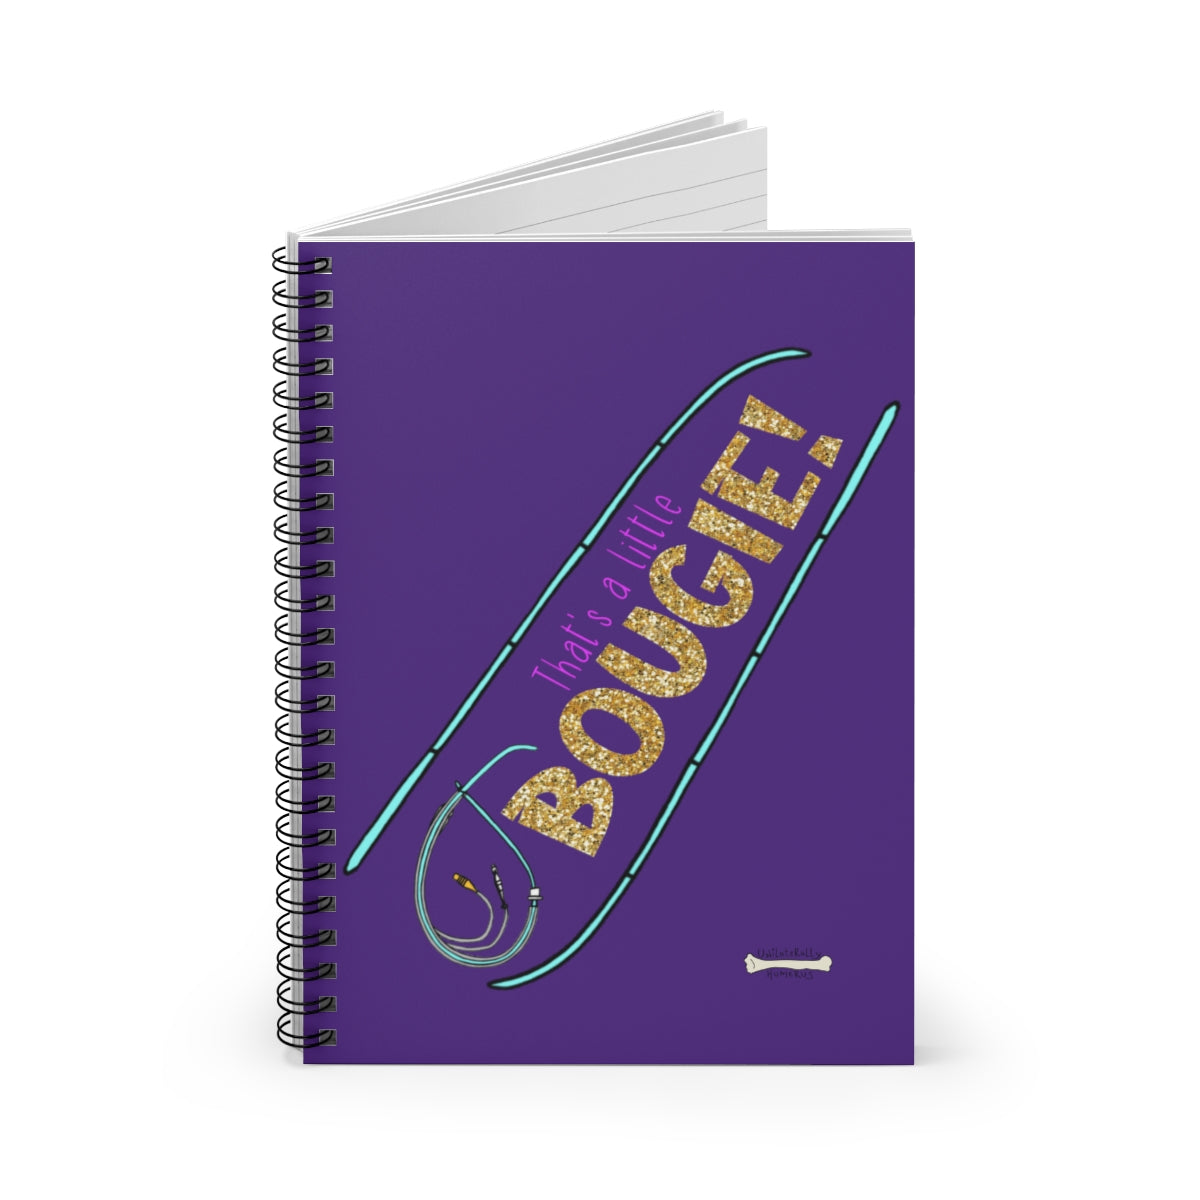 That's a Little Bougie! Spiral Notebook - Ruled Line